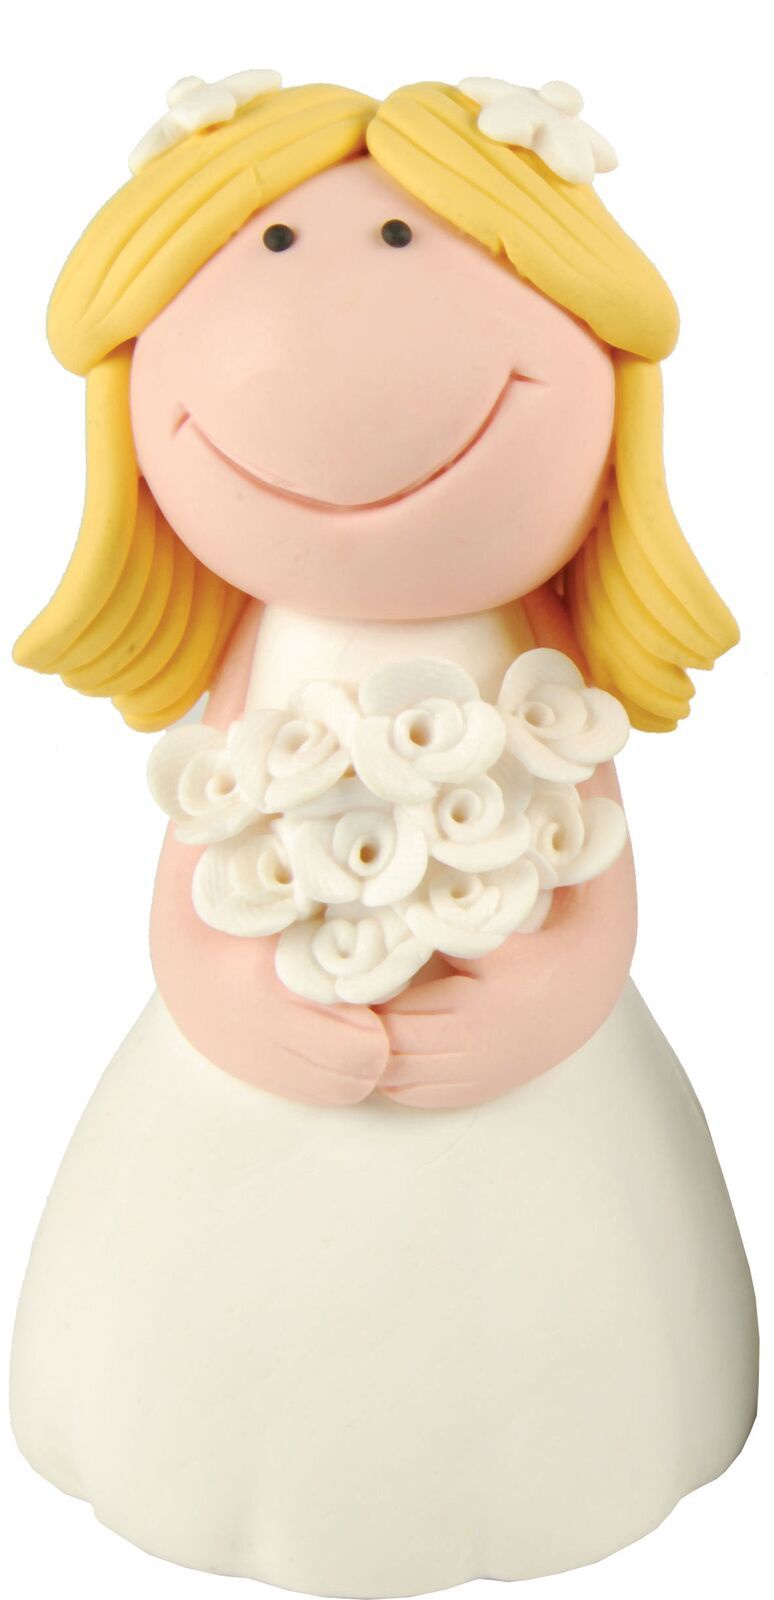 Bride With Blonde Hair Cake Topper Bake